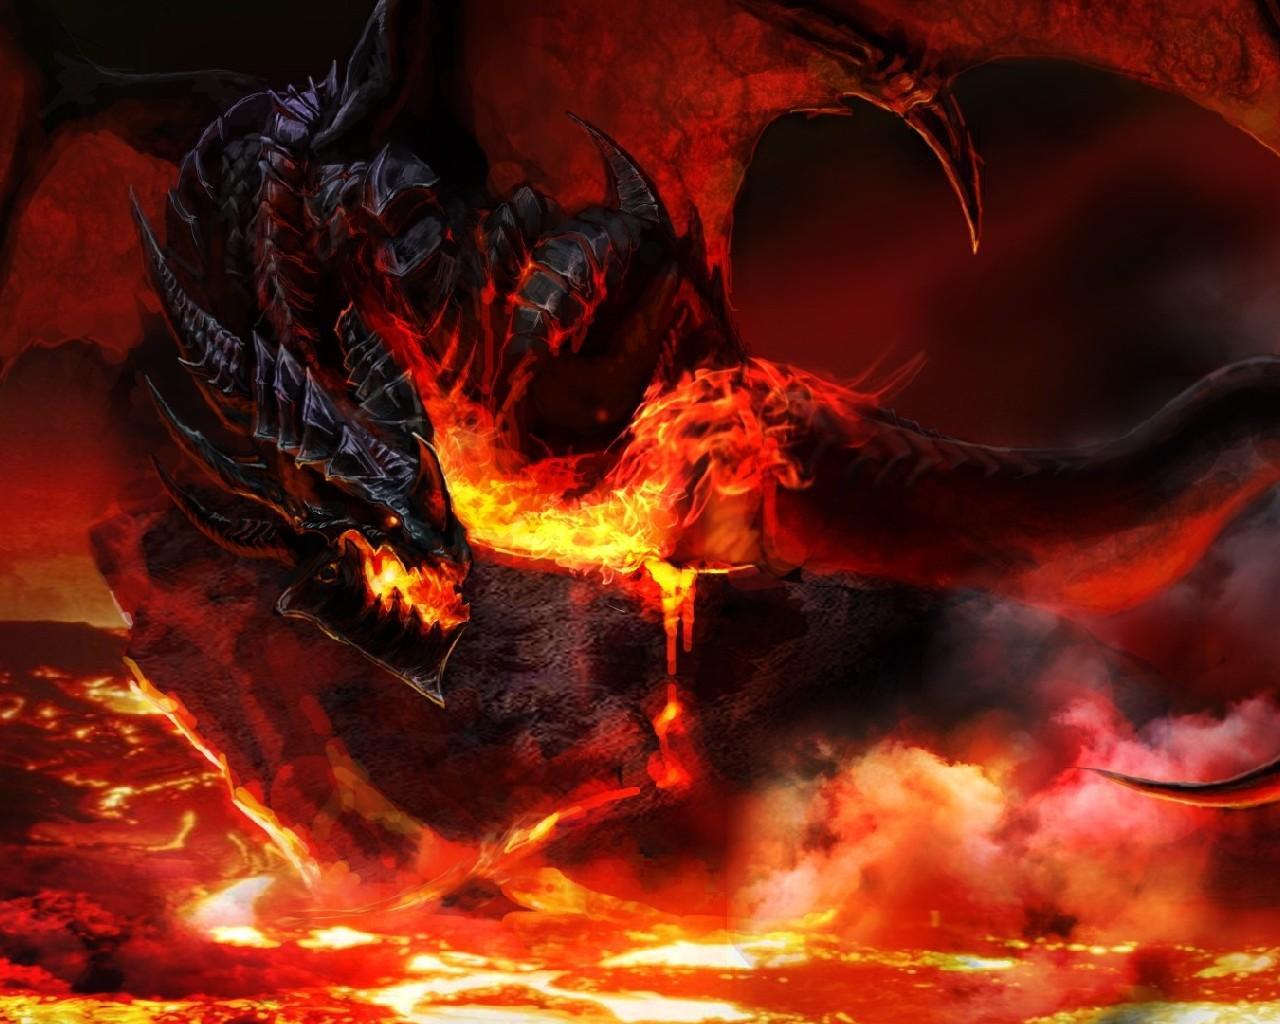 Dragon Pictures Angry Fire HD Wallpaper for Android - APK Download